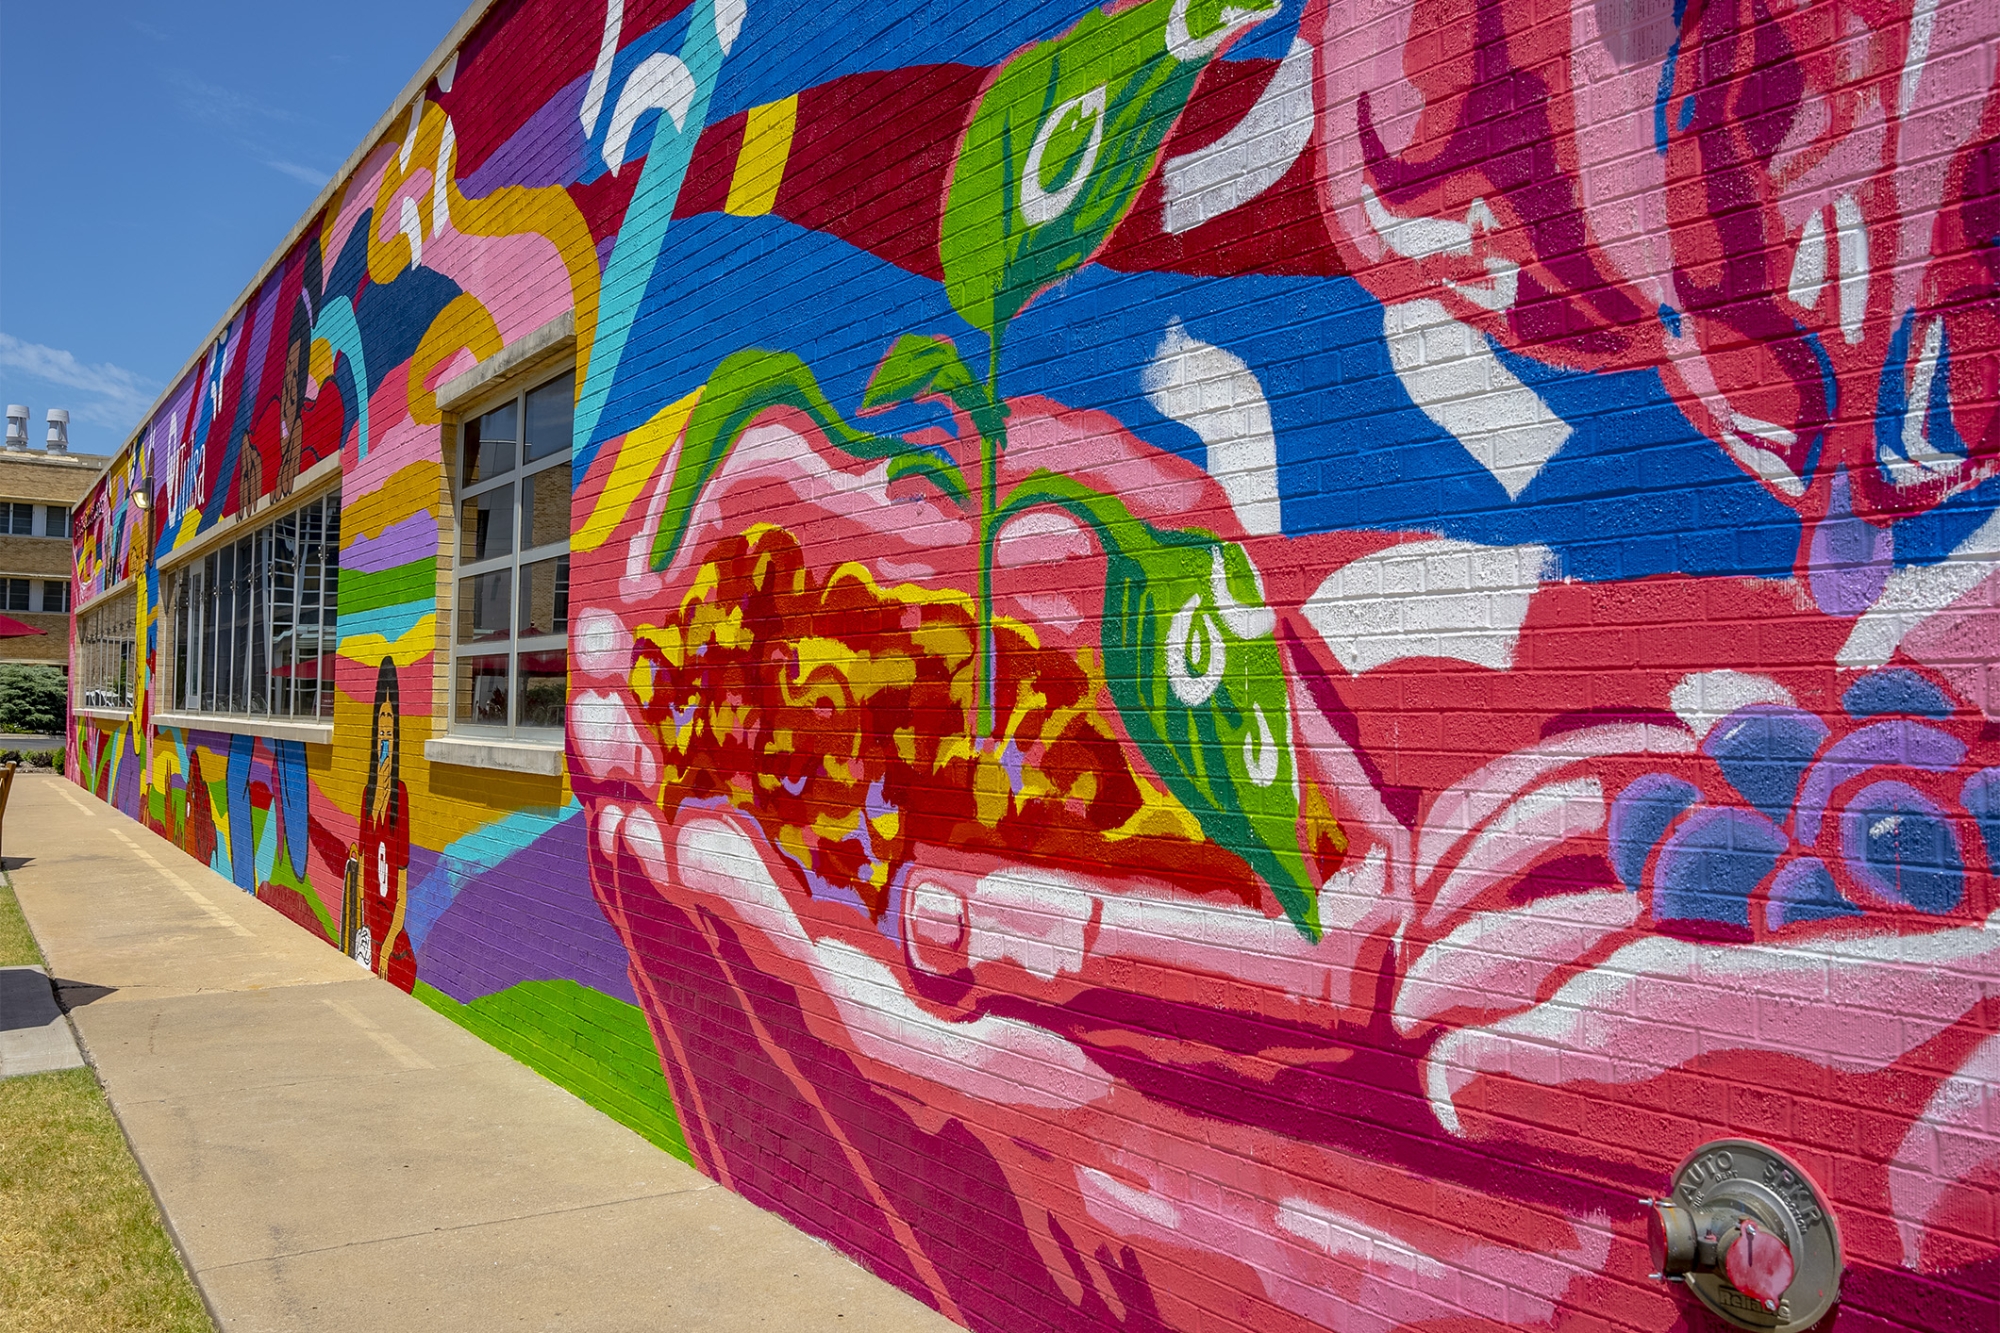 A close of up the mural, showing the detail in the pink and fuscia hands holding a green leafed plant growing from soil in its palms